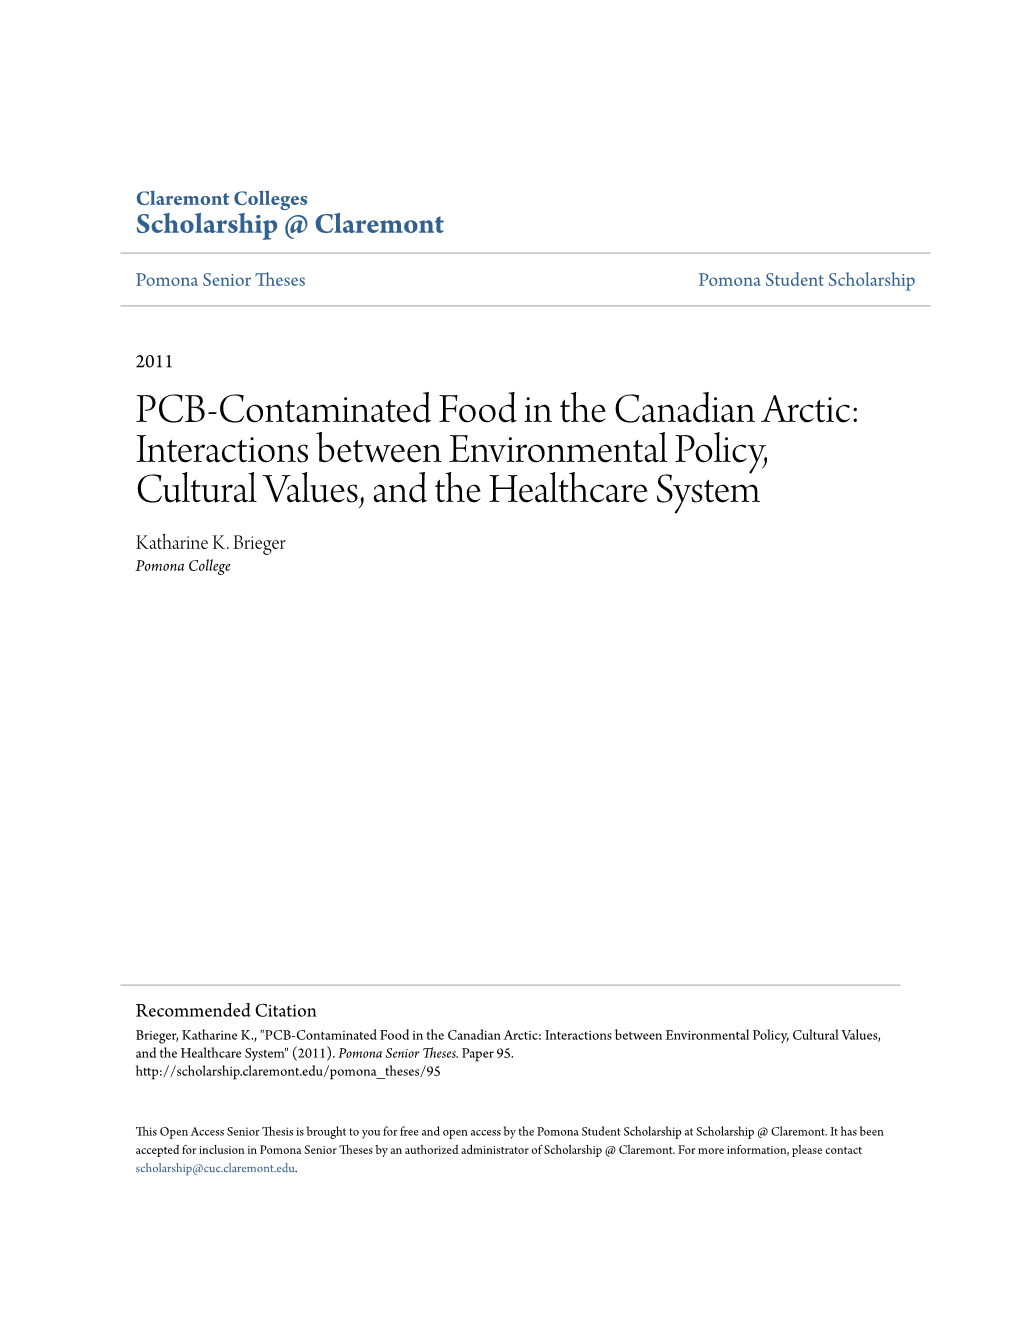 PCB-Contaminated Food in the Canadian Arctic: Interactions Between Environmental Policy, Cultural Values, and the Healthcare System Katharine K